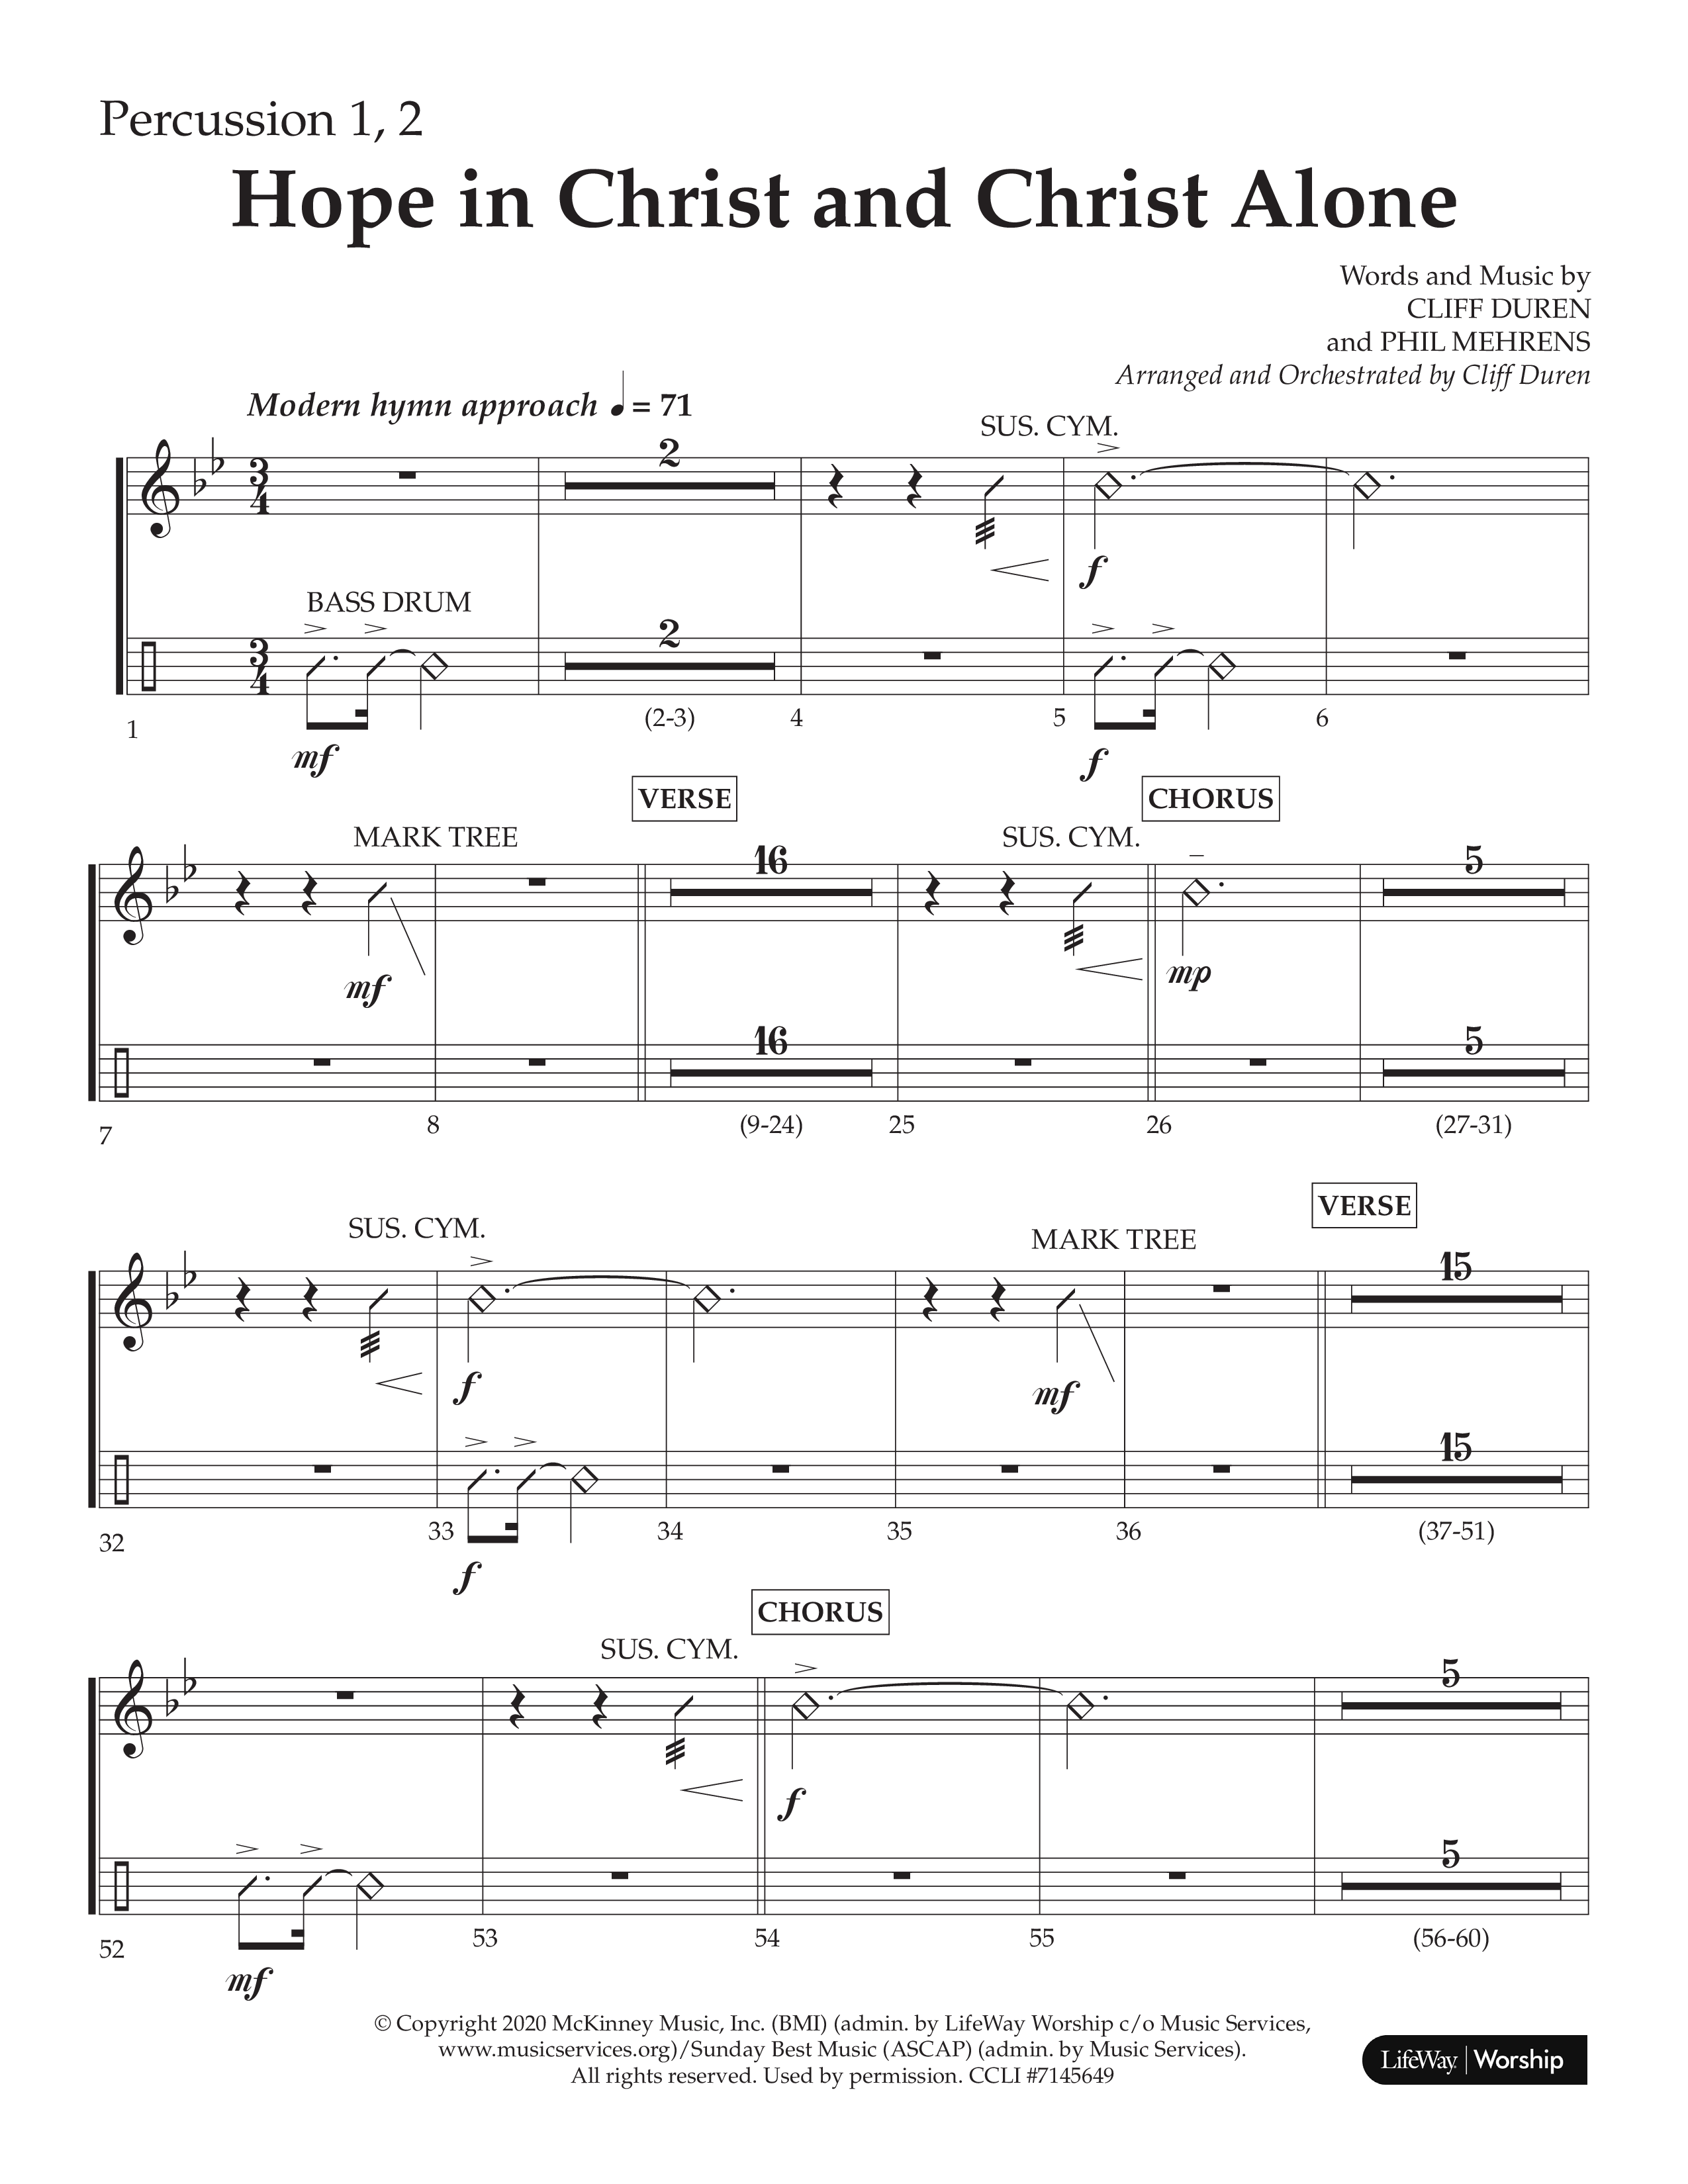 Hope In Christ And Christ Alone (Choral Anthem SATB) Percussion 1/2 (Lifeway Choral / Arr. Cliff Duren)